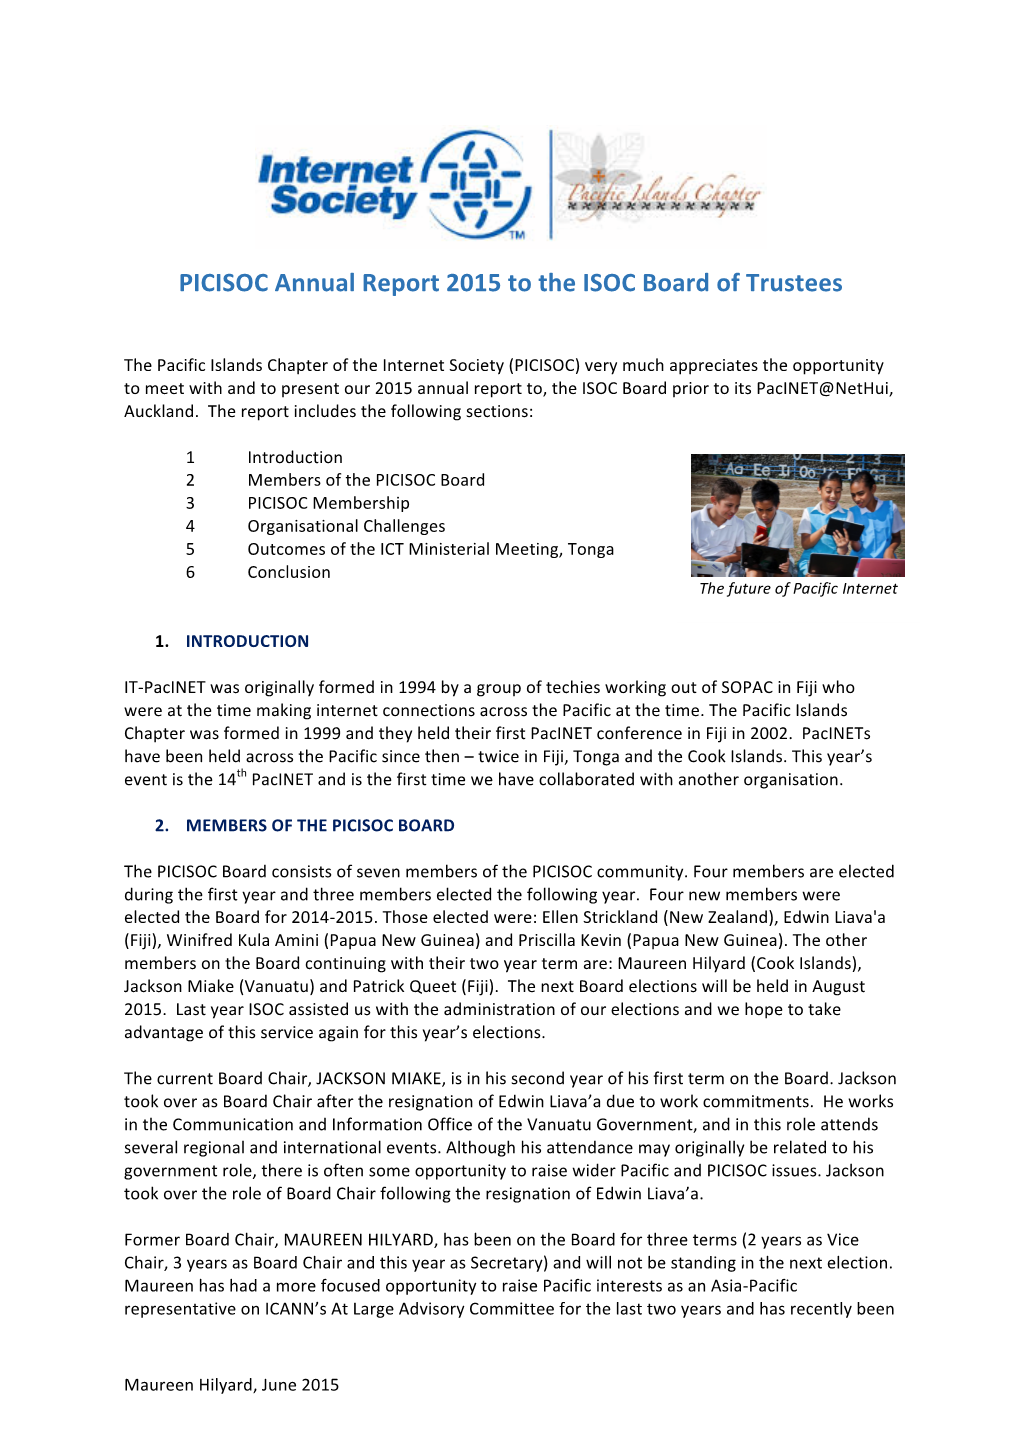 PICISOC Annual Report 2015 to the ISOC Board of Trustees